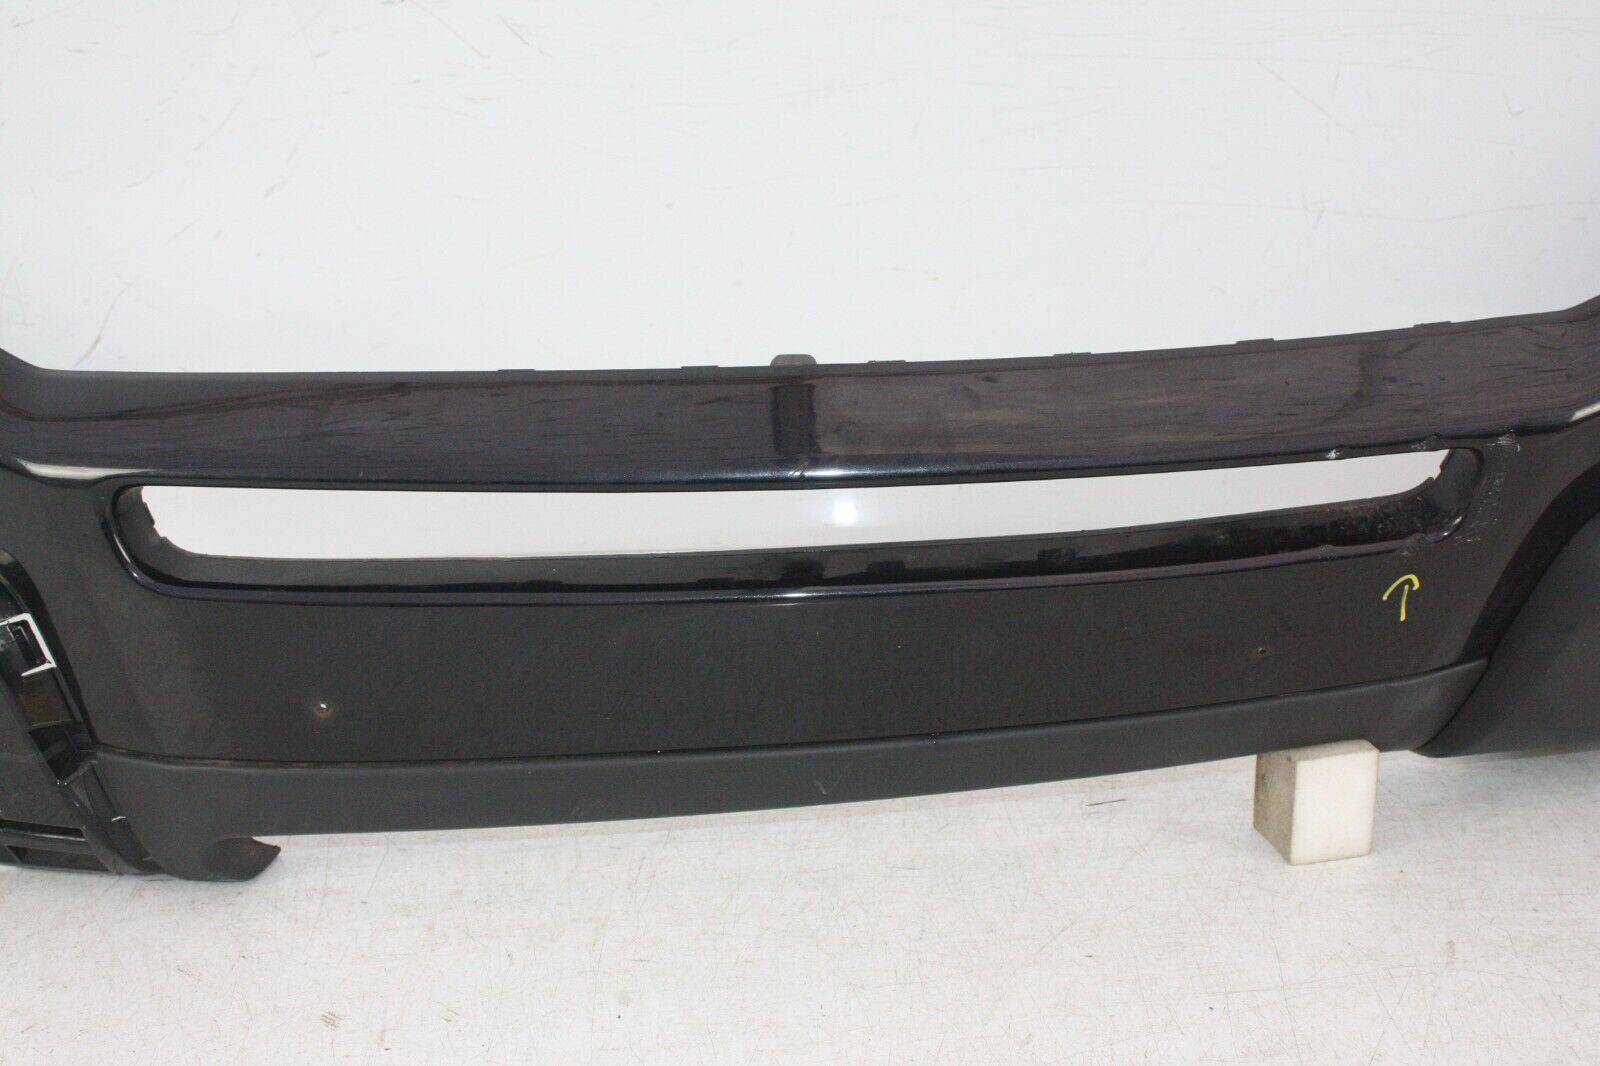 VOLVO-XC90-FRONT-BUMPER-2003-TO-2006-175367536977-3